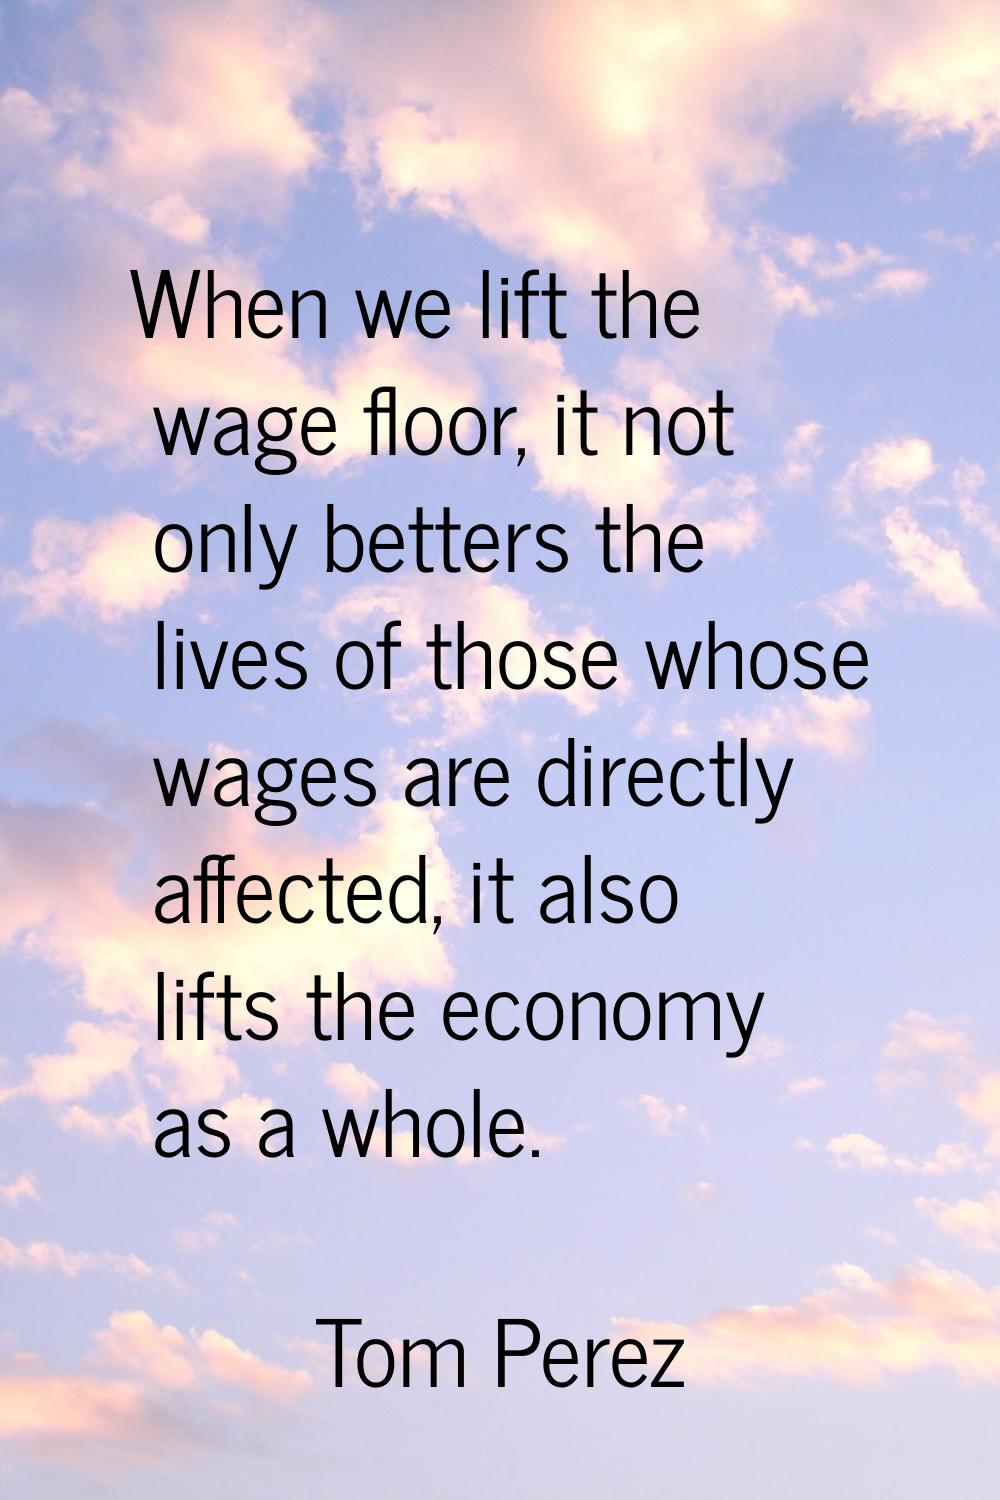 When we lift the wage floor, it not only betters the lives of those whose wages are directly affect